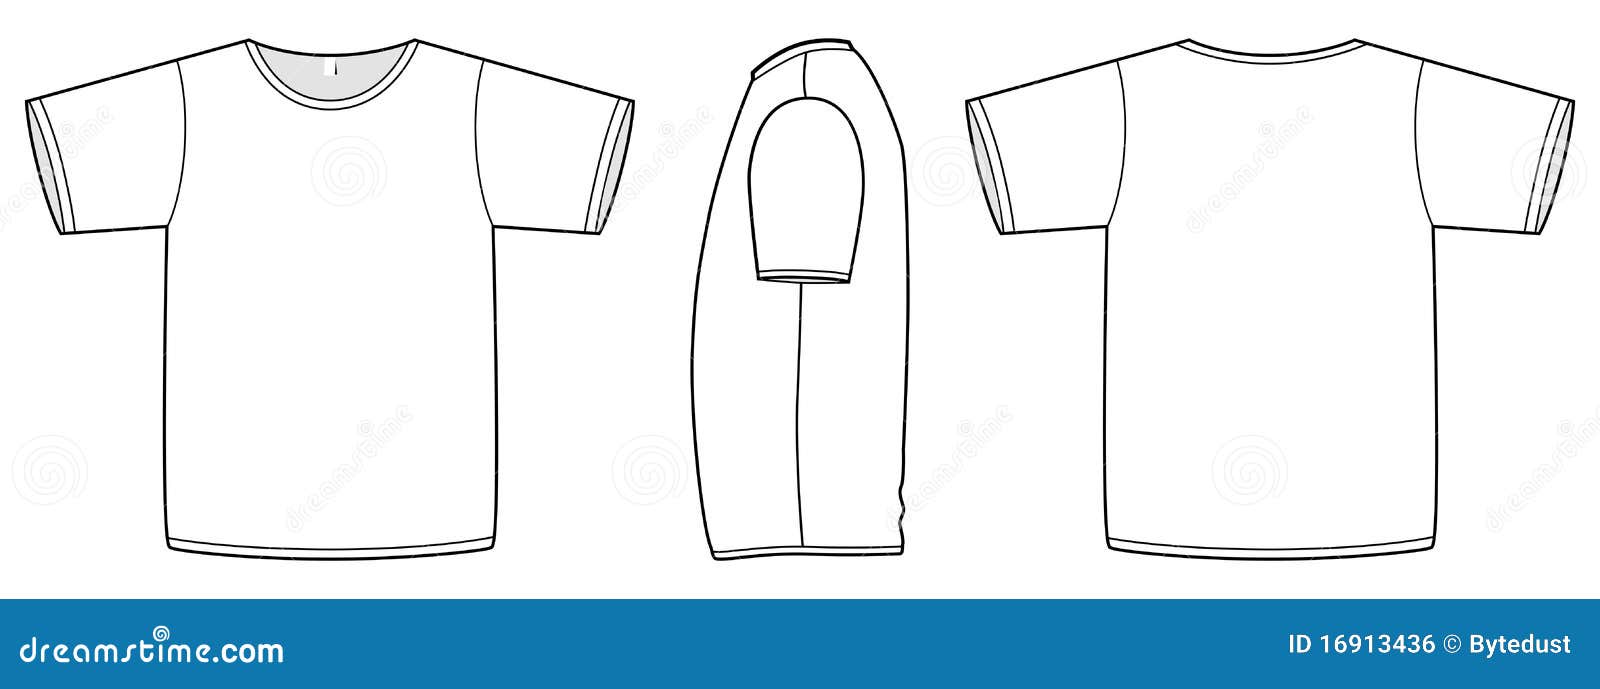 design your own sports shirt